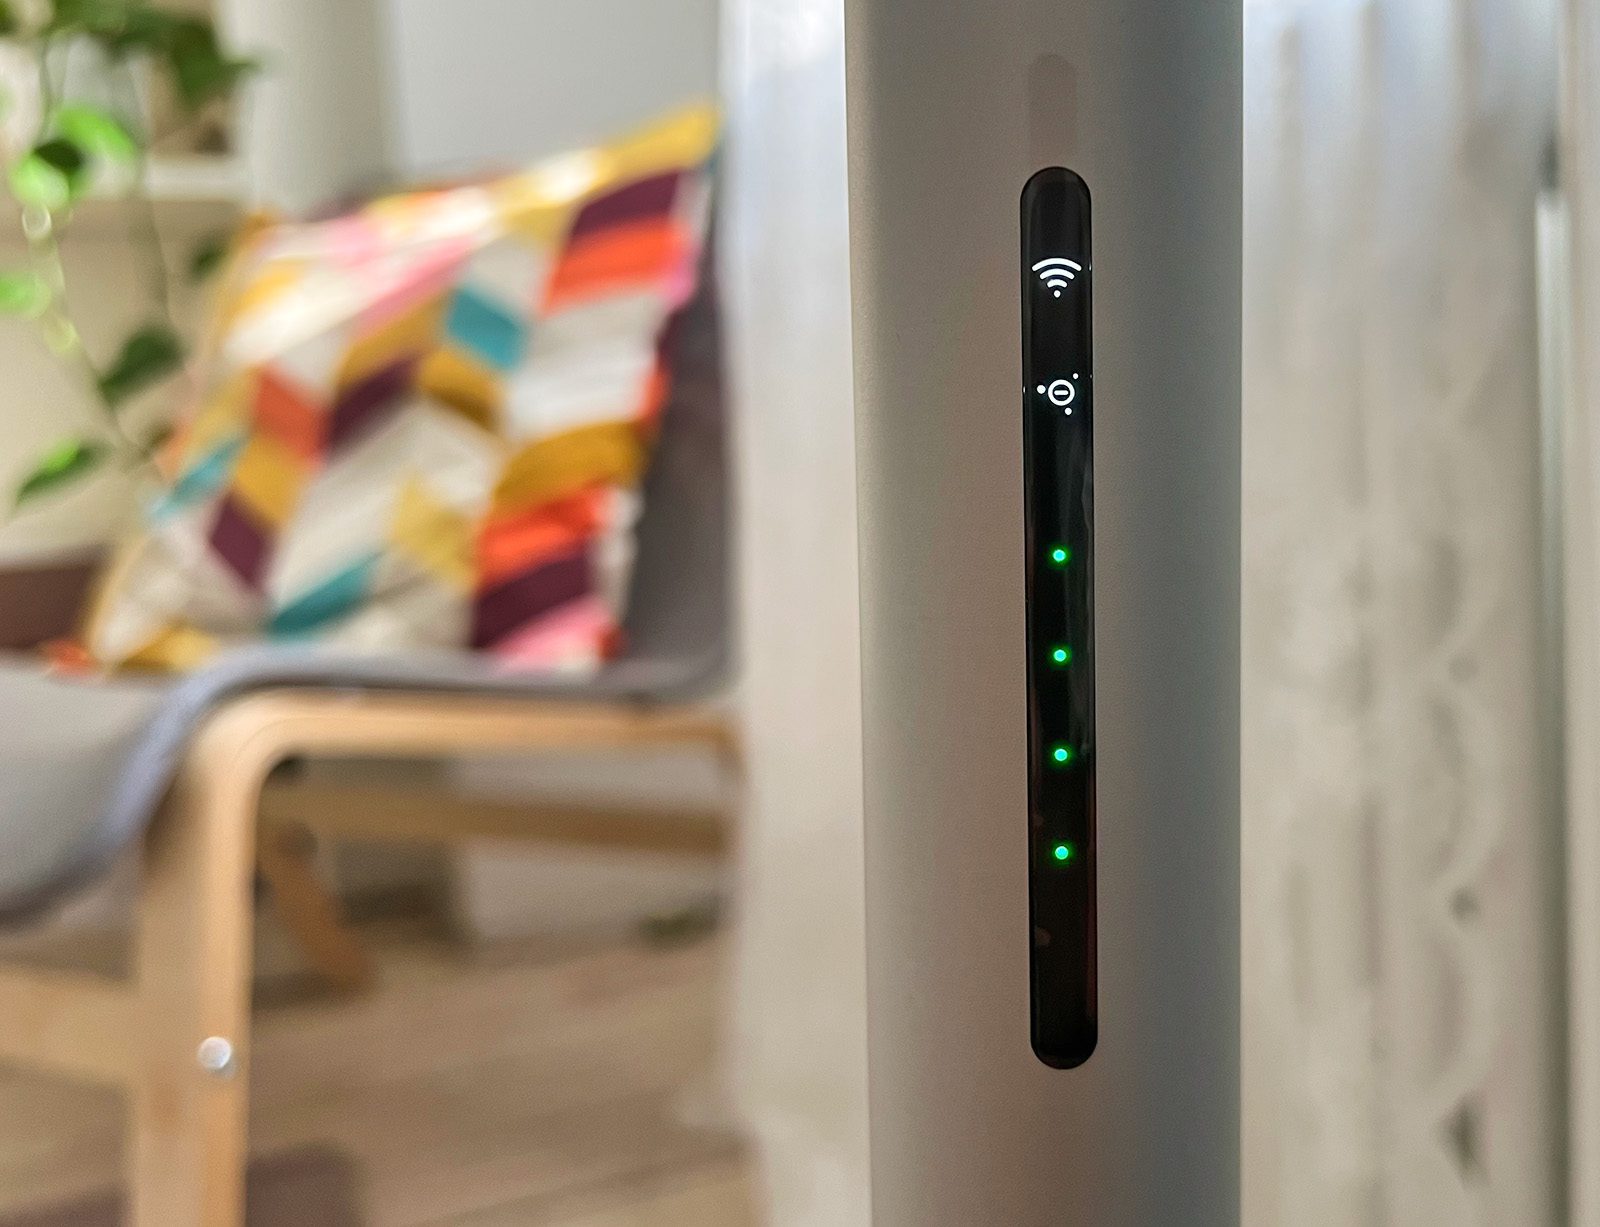 Here you can see the display of the Smartmi Standing Fan 3. The green dots show the speed level, the top symbols show the WiFi connection and the ionizer for air purification. Underneath the green dots is an icon for nature mode if it were enabled.